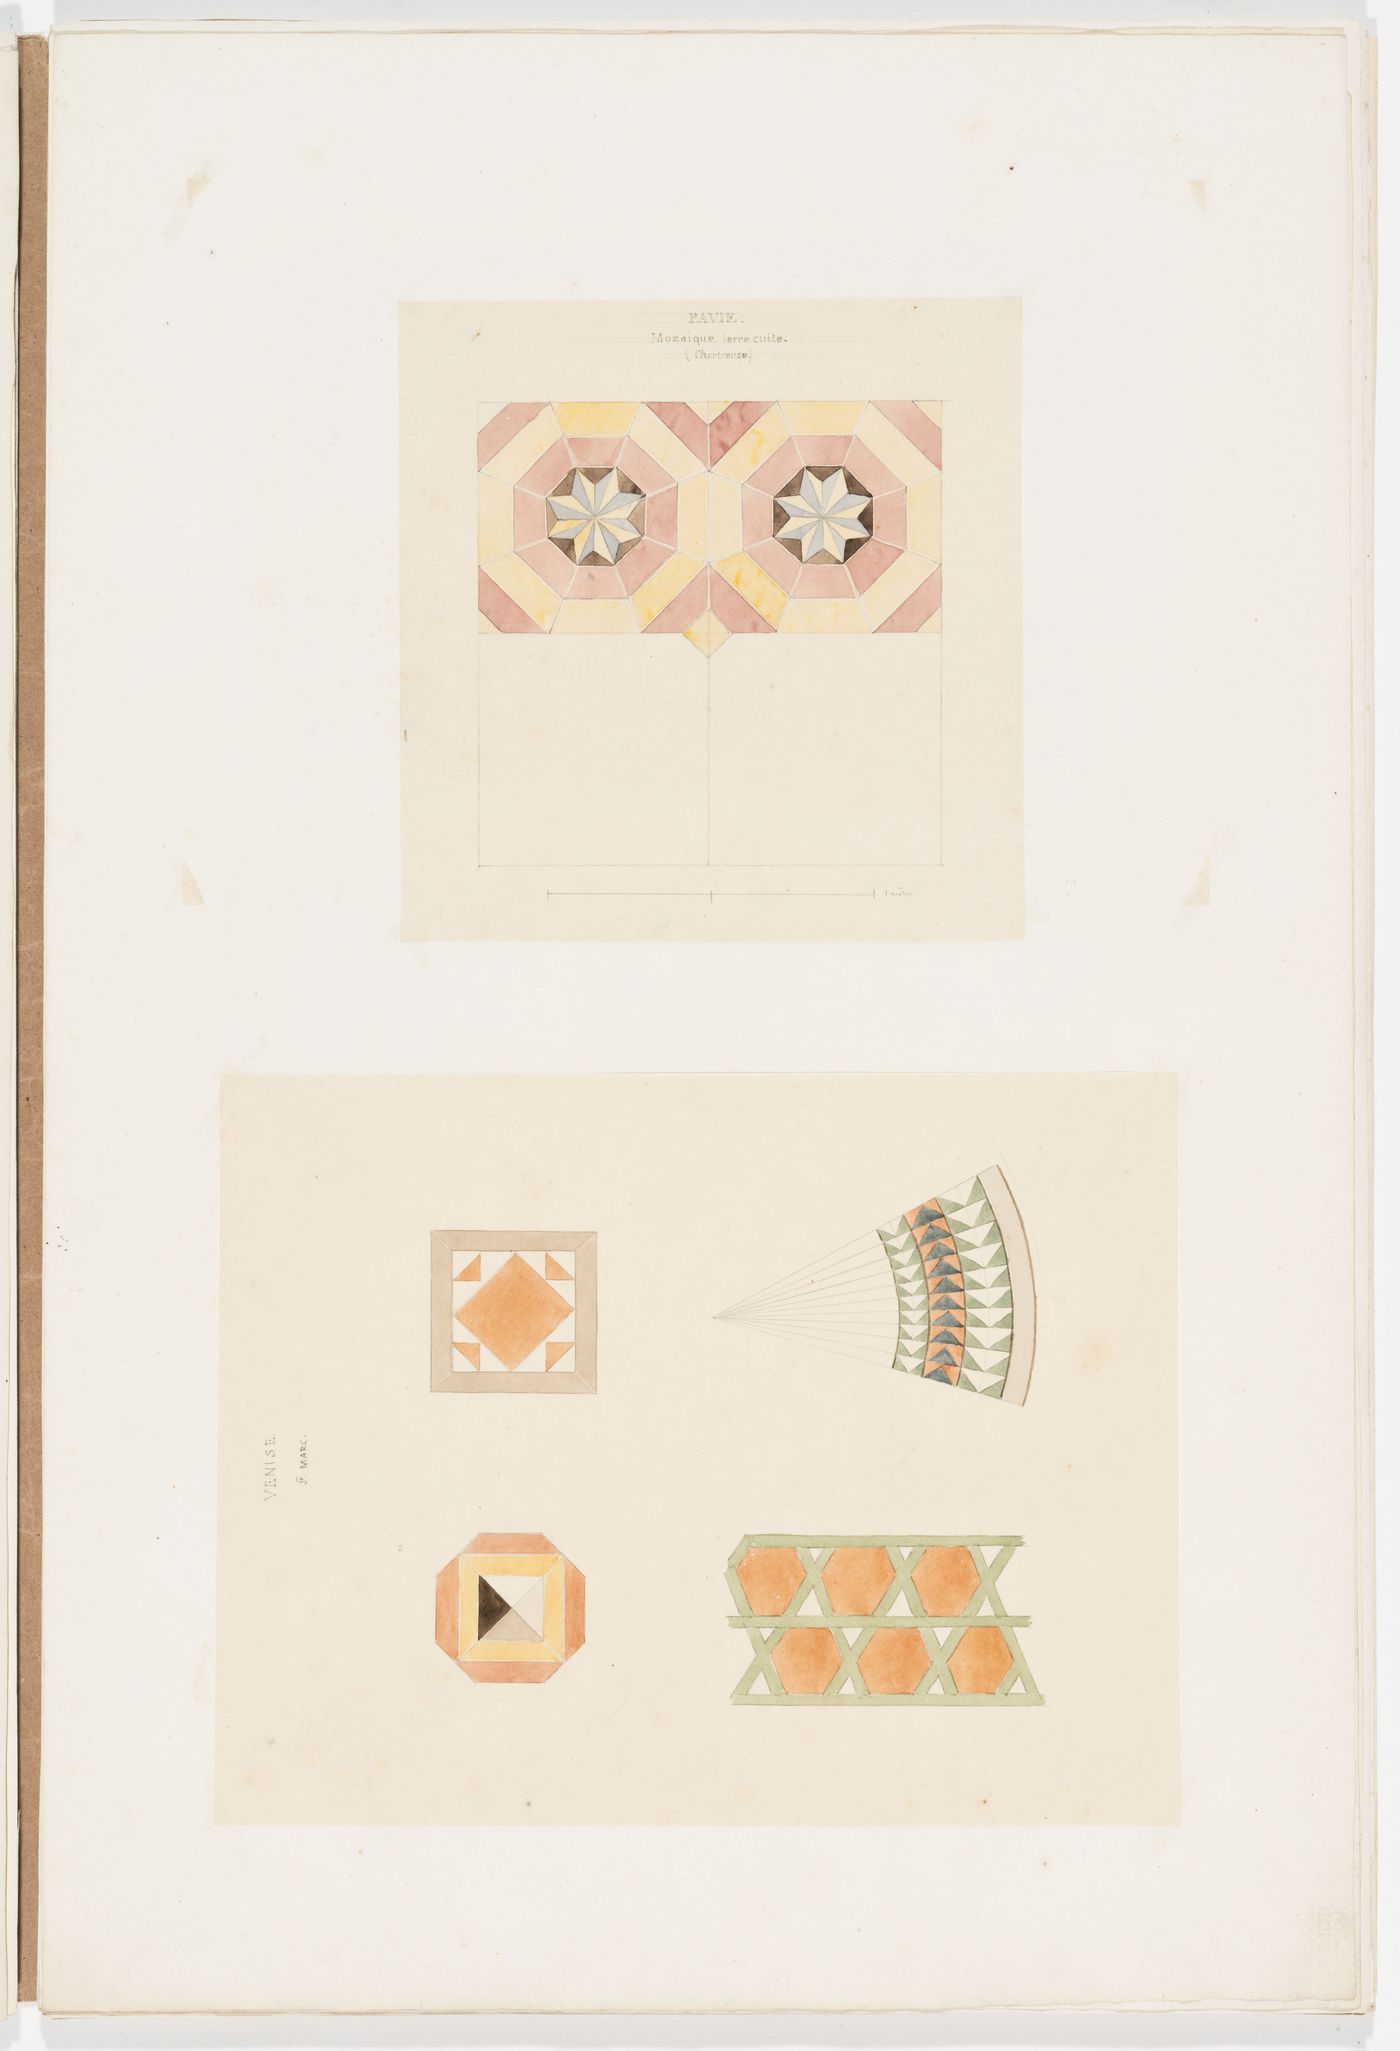 Drawing of a geometric terracotta mosaic in the 'chartreuse', Pavia; Drawing of four geometric patterns, probably floor tiles, from San Marco, Venice